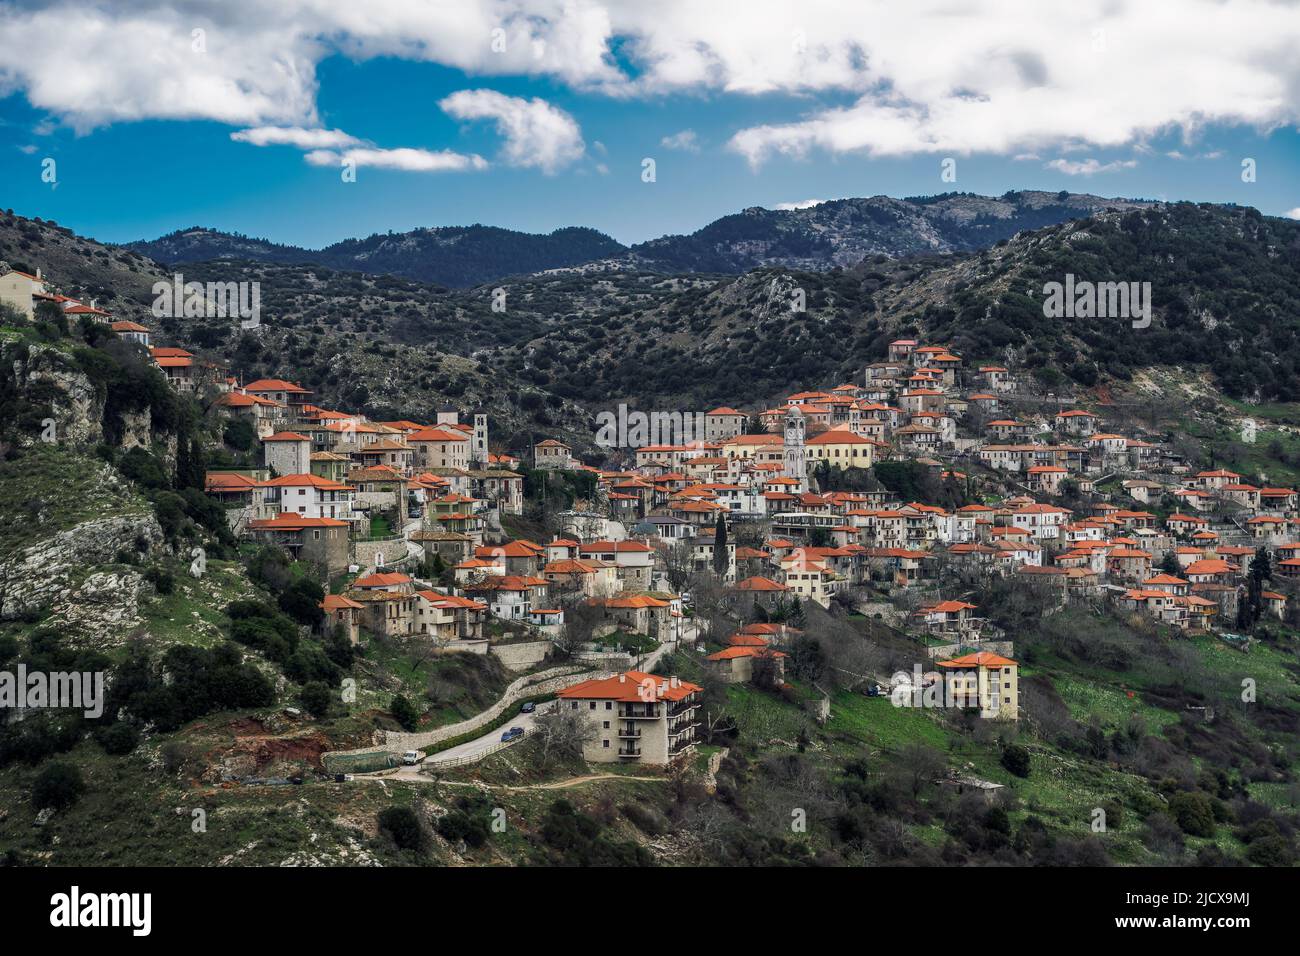 Greek village mountain view panorama with traditional low-rise houses with red roof tiles in Dimitsana, Arcadia, Peloponnese, Greece, Europe Stock Photo